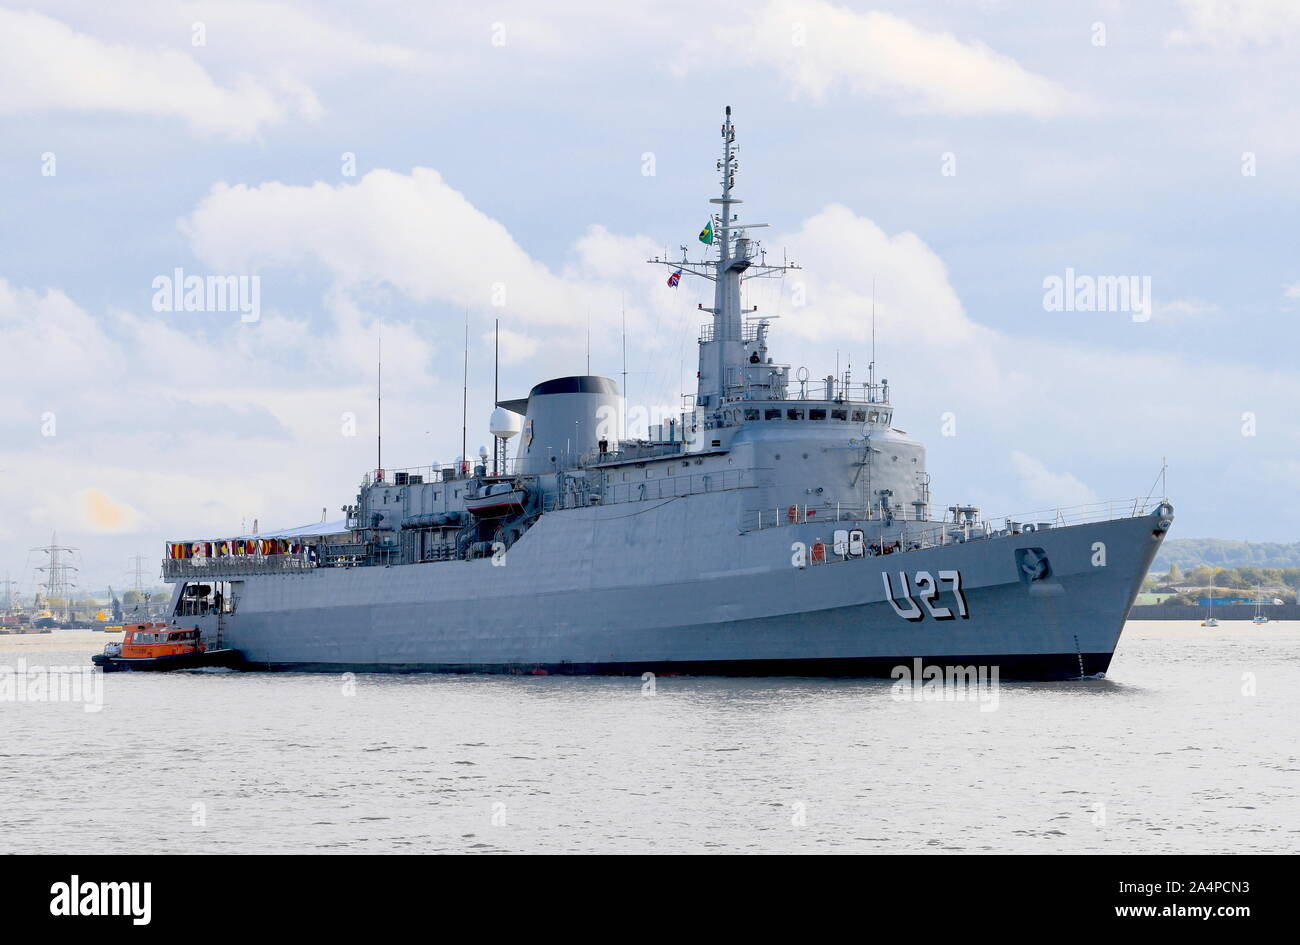 NS Brasil  is a training vessel for officer of the Brazilian Navy and associated maritime academies. The vessel is pictured on the Thames.Thames. Stock Photo